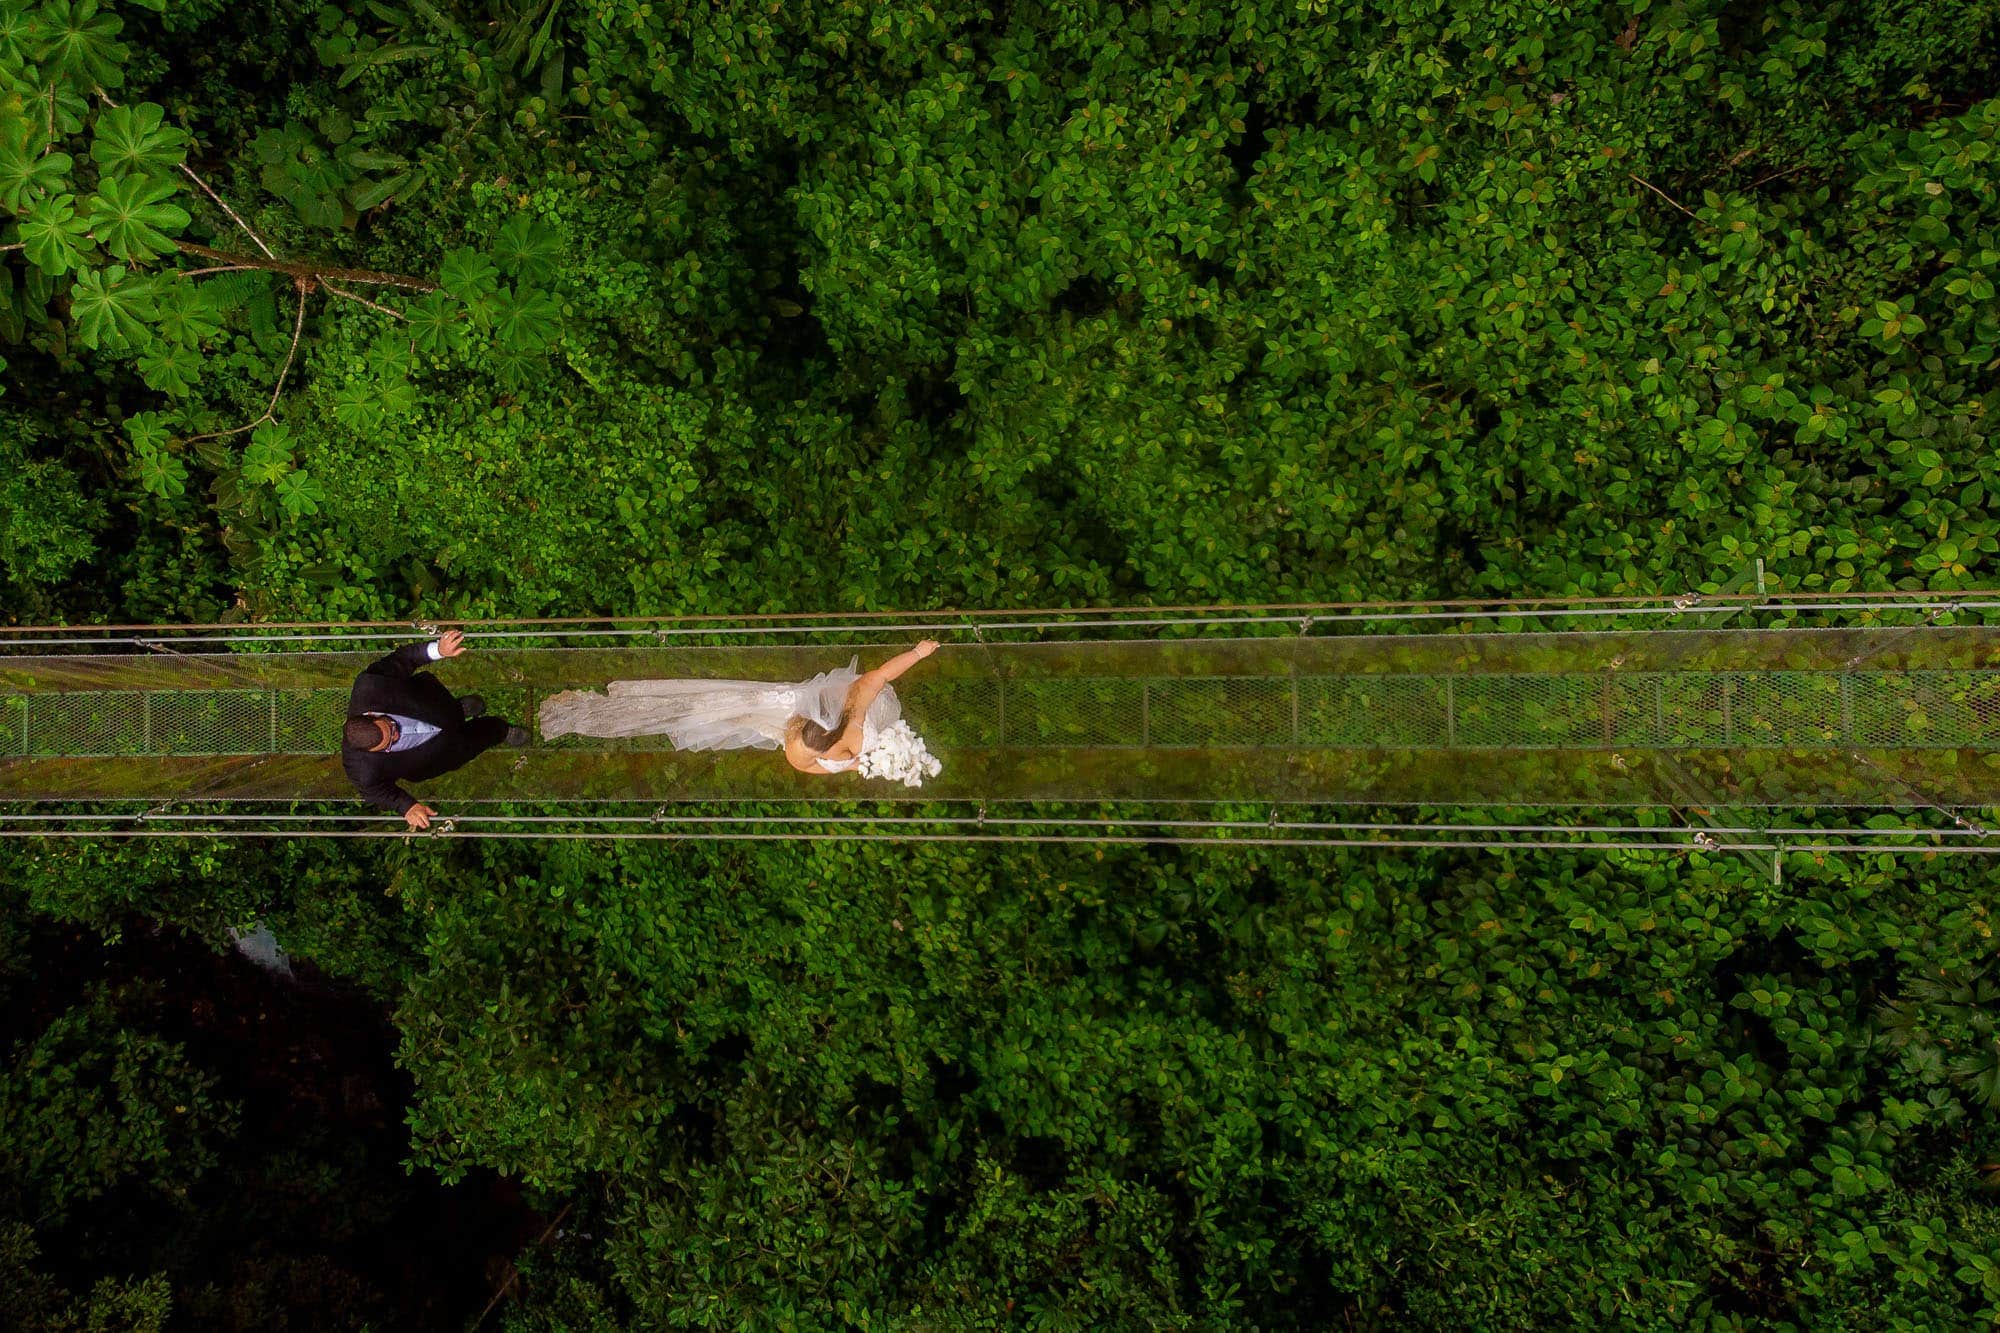 Bride and groom cross the hanging bridge above the waterfall